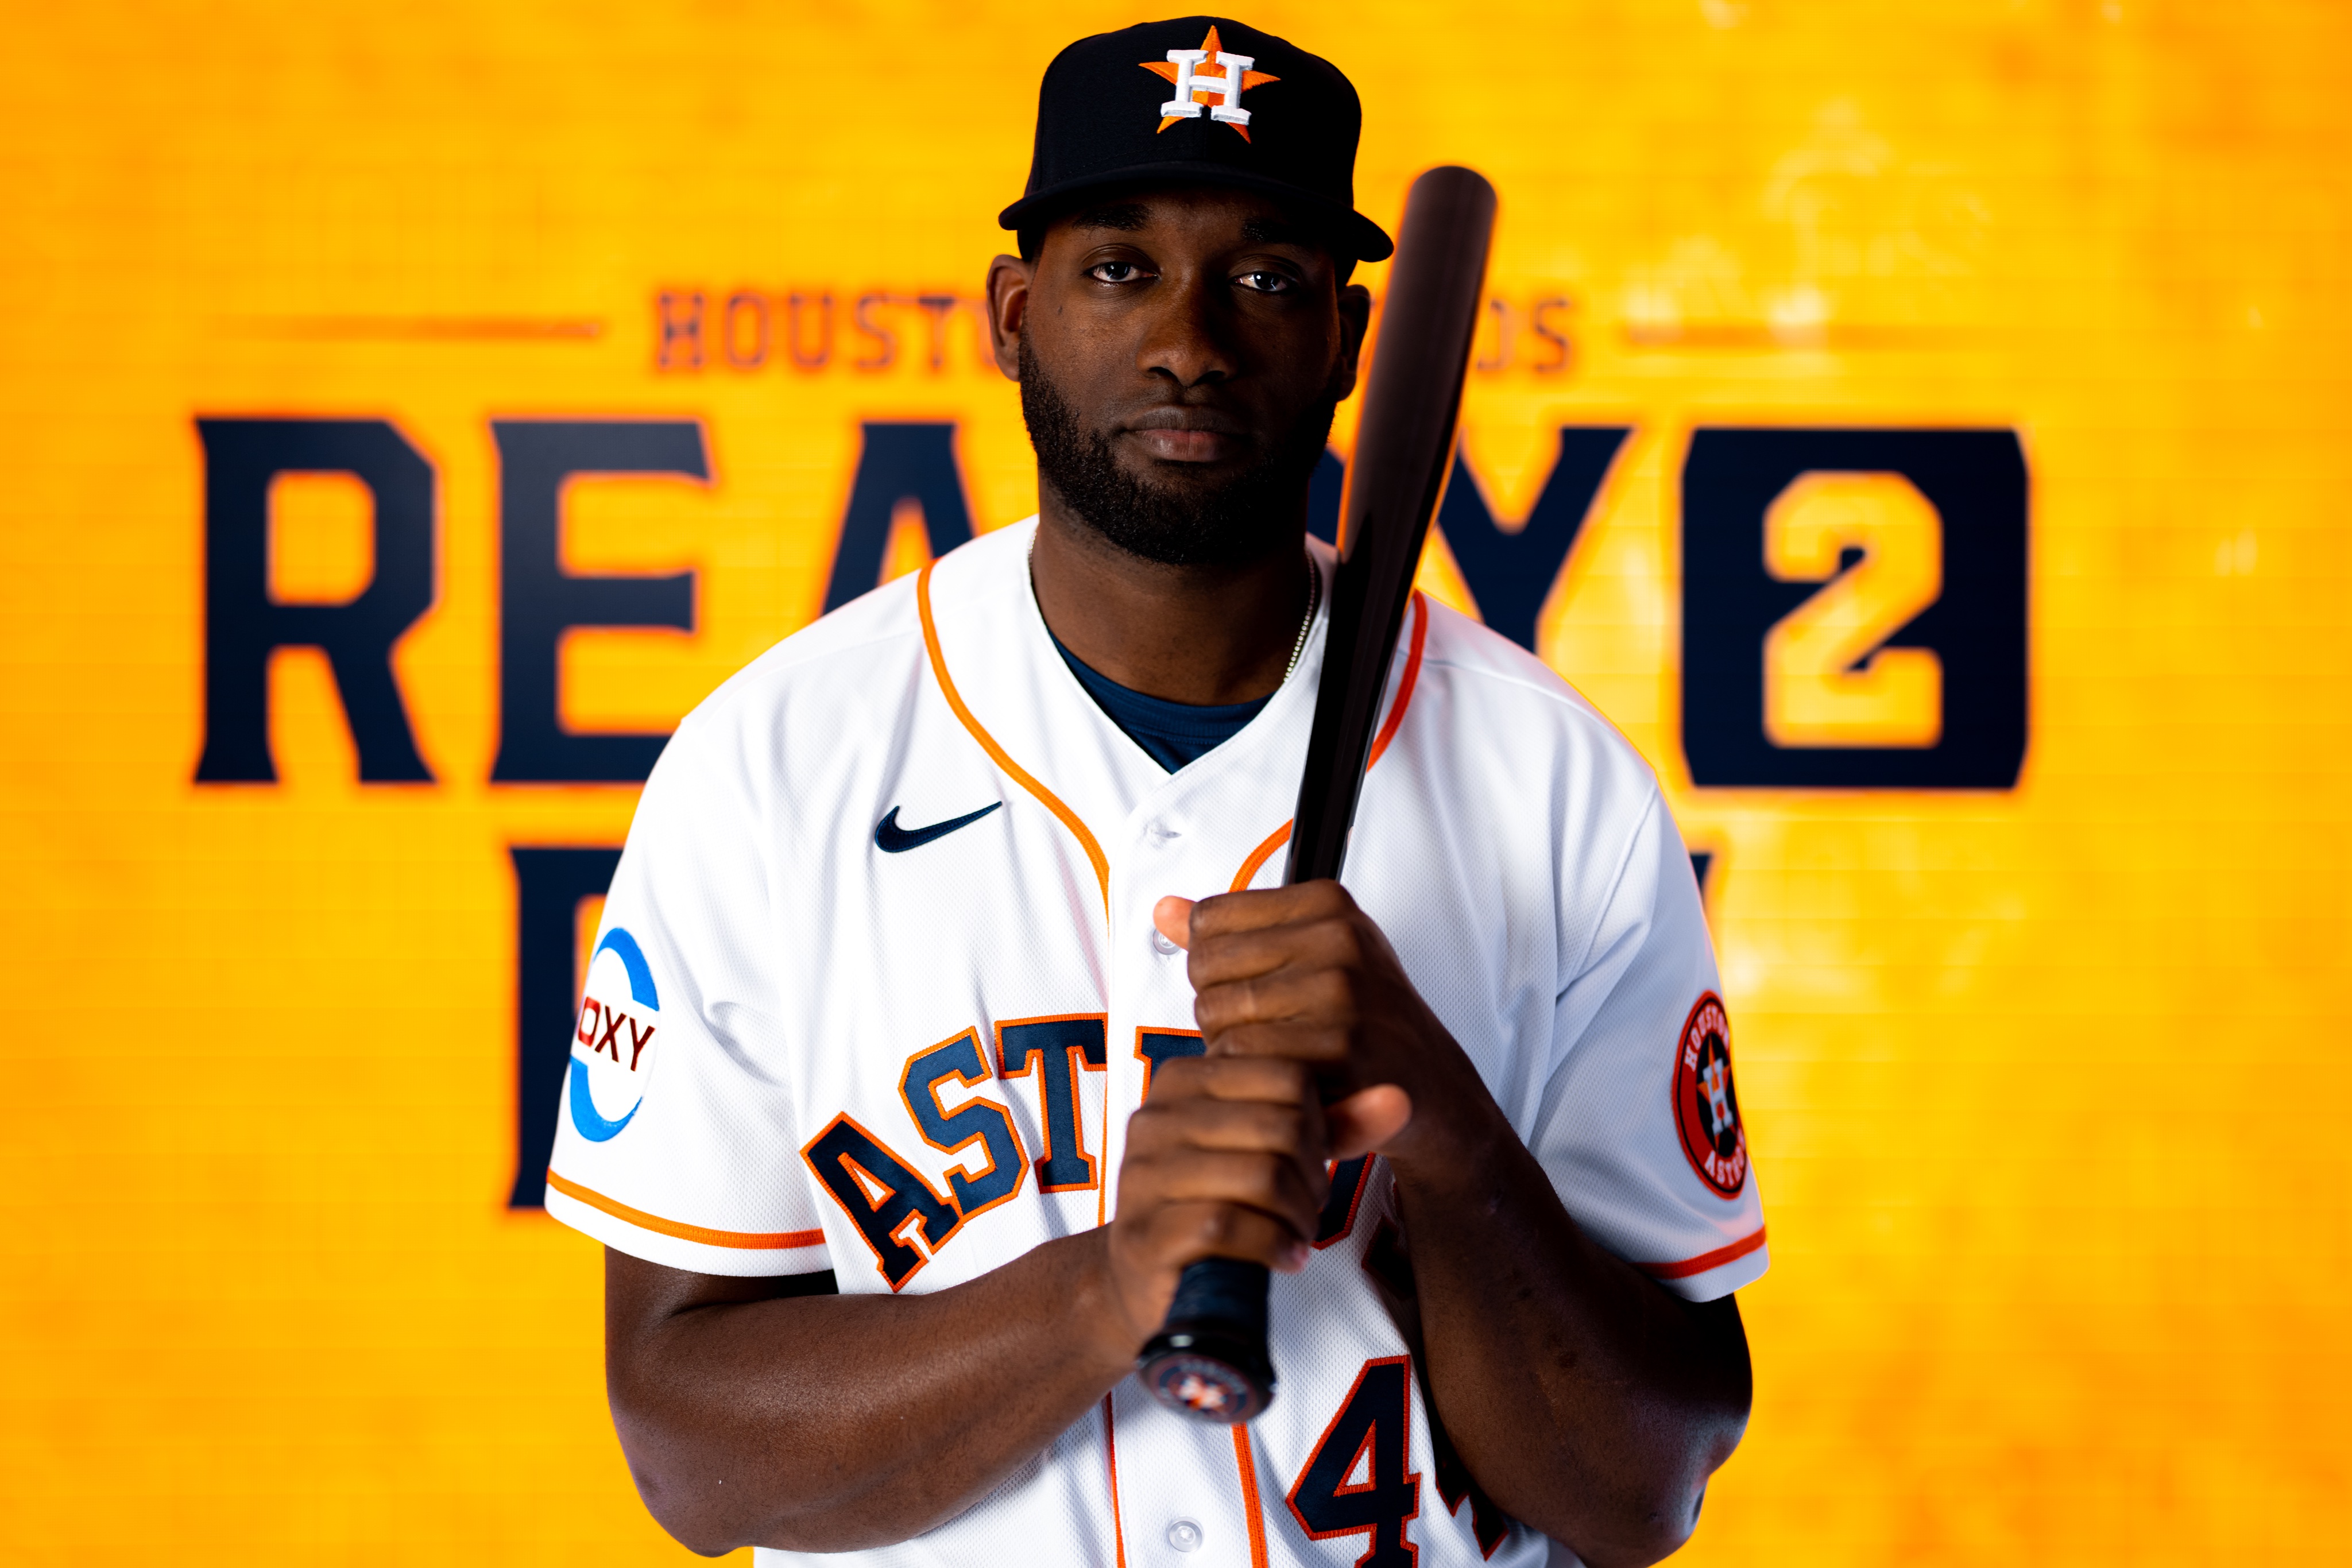 Paul Lukas on X: Our first on-field look at the Astros' Space CIty  alternates.  / X